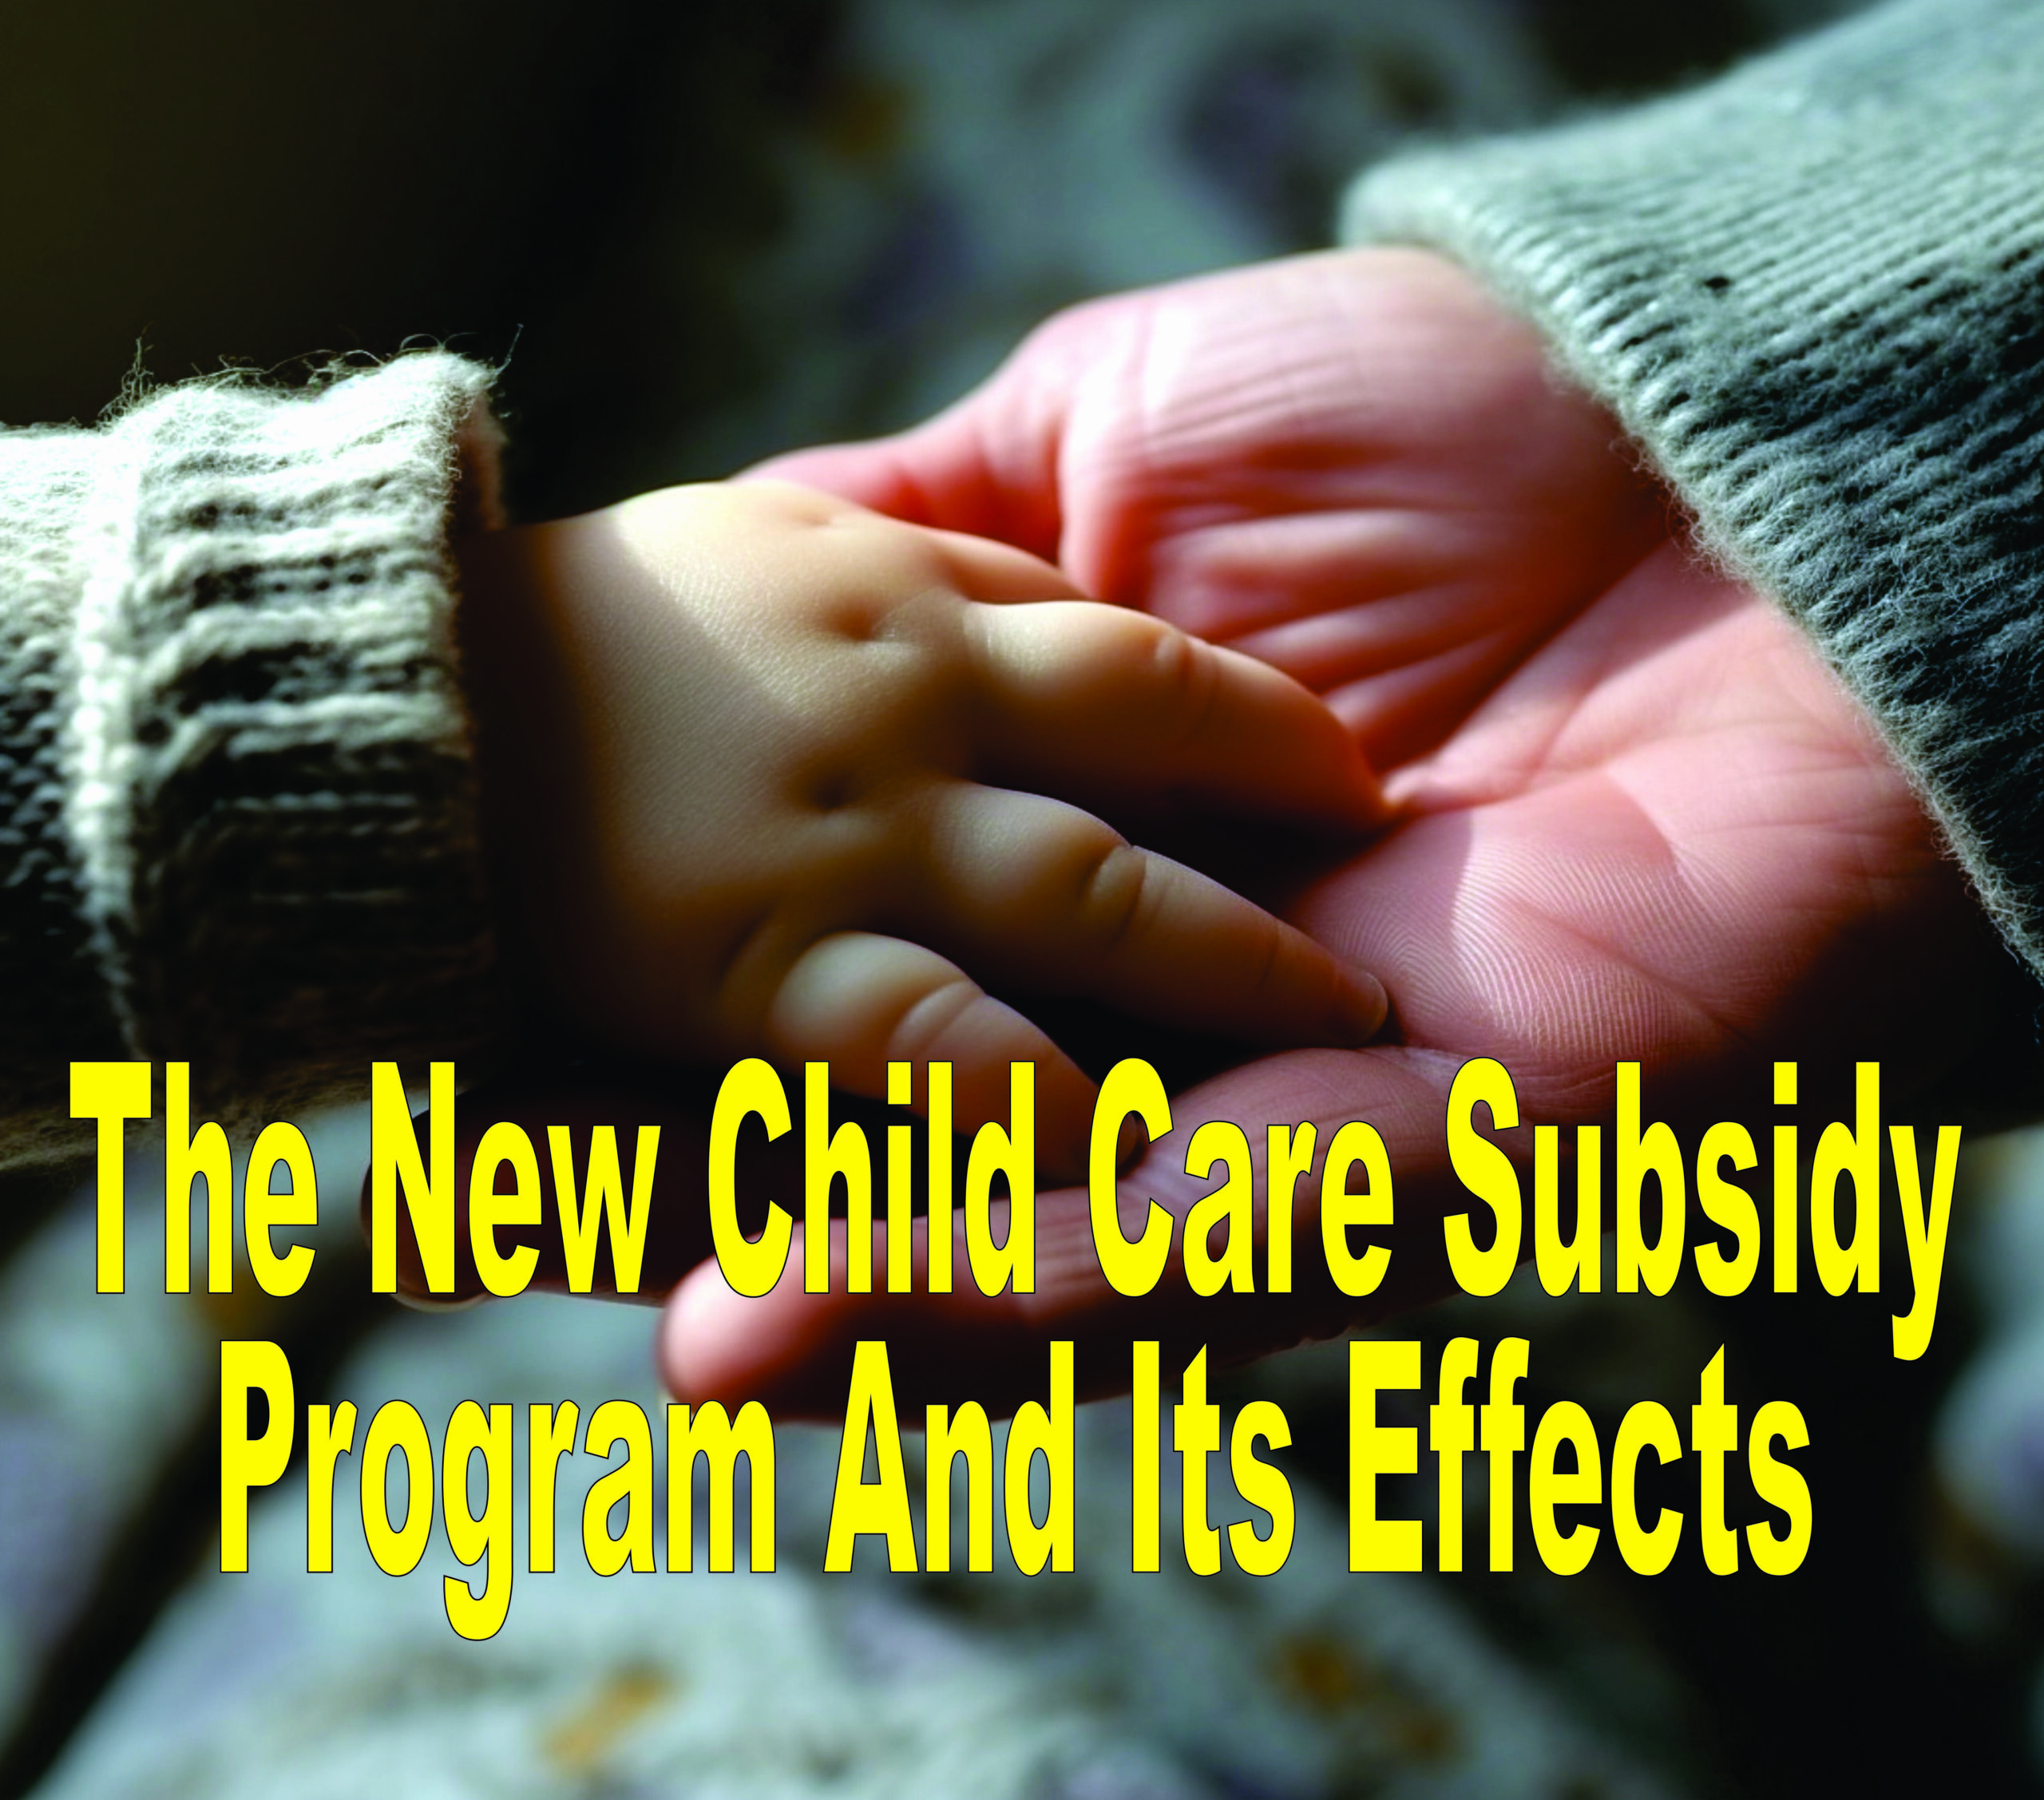 The New Child Care Subsidy Program And Its Effects